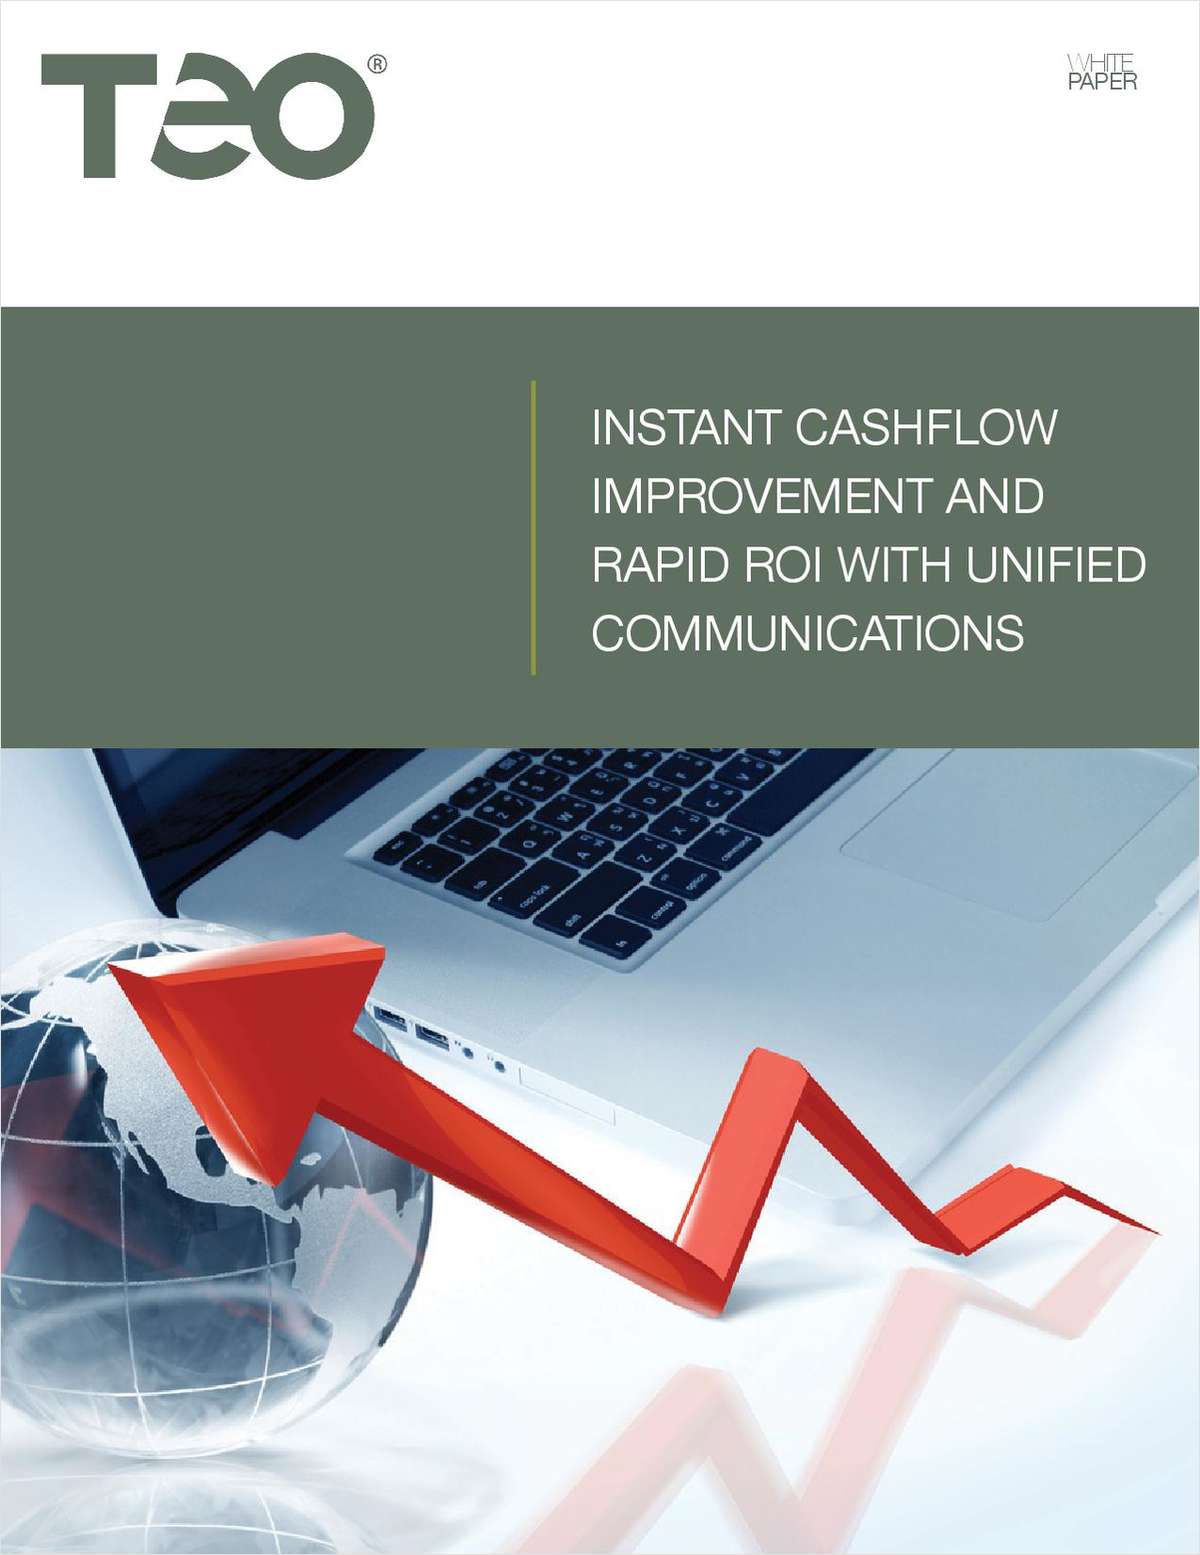 Instant Cashflow Improvement and Rapid ROI with Unified Communications